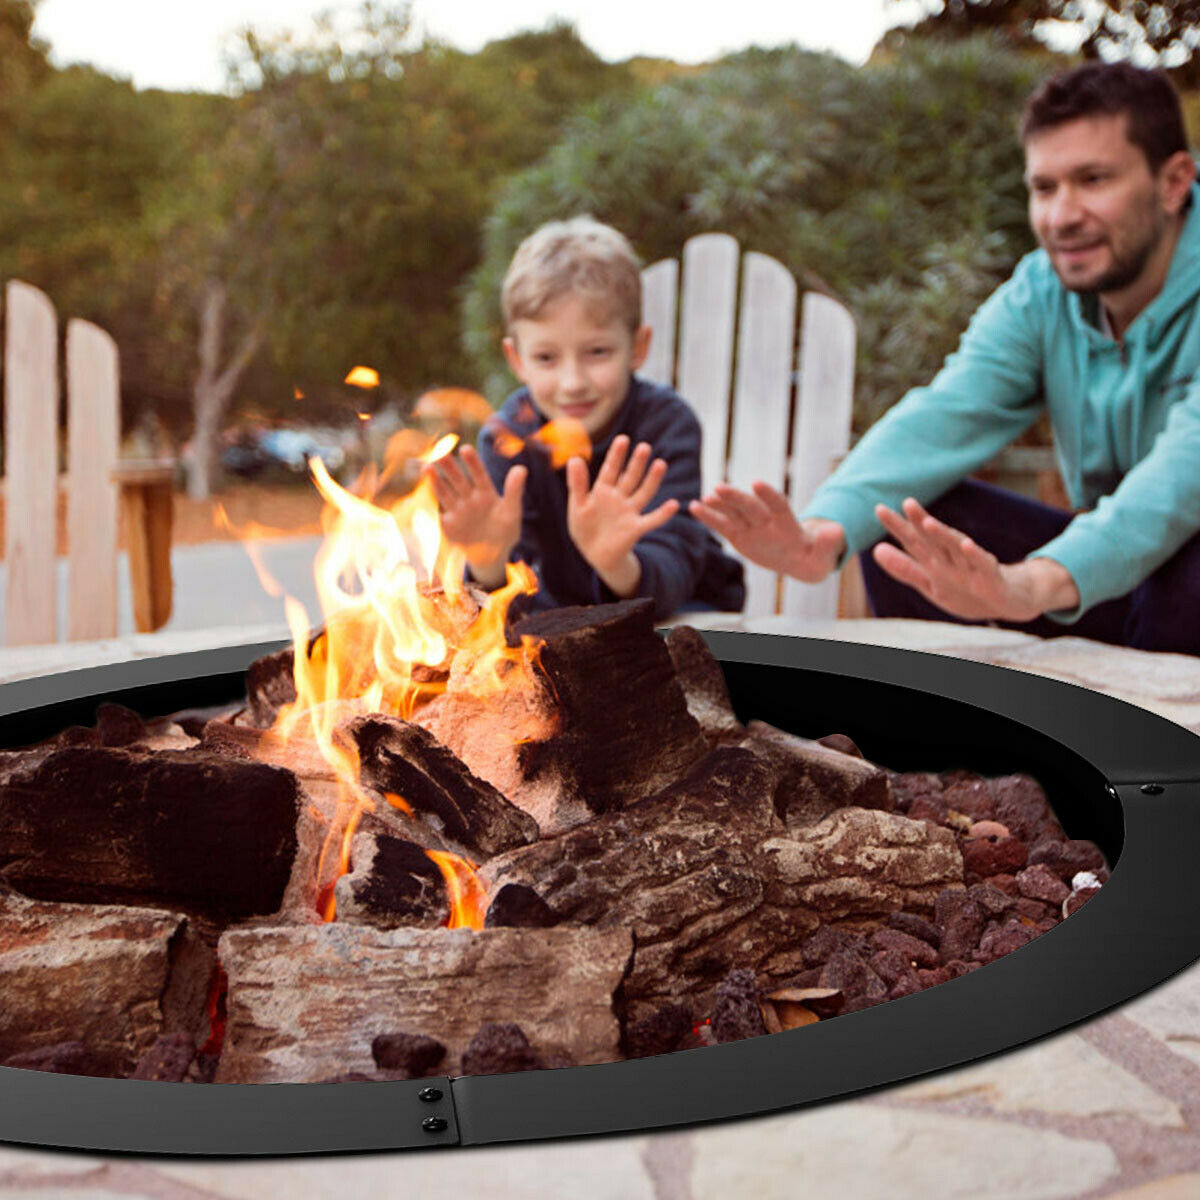 Gymax 36 Inch Round Steel Fire Pit Ring Liner DIY Wood Burning Insert - image 9 of 10